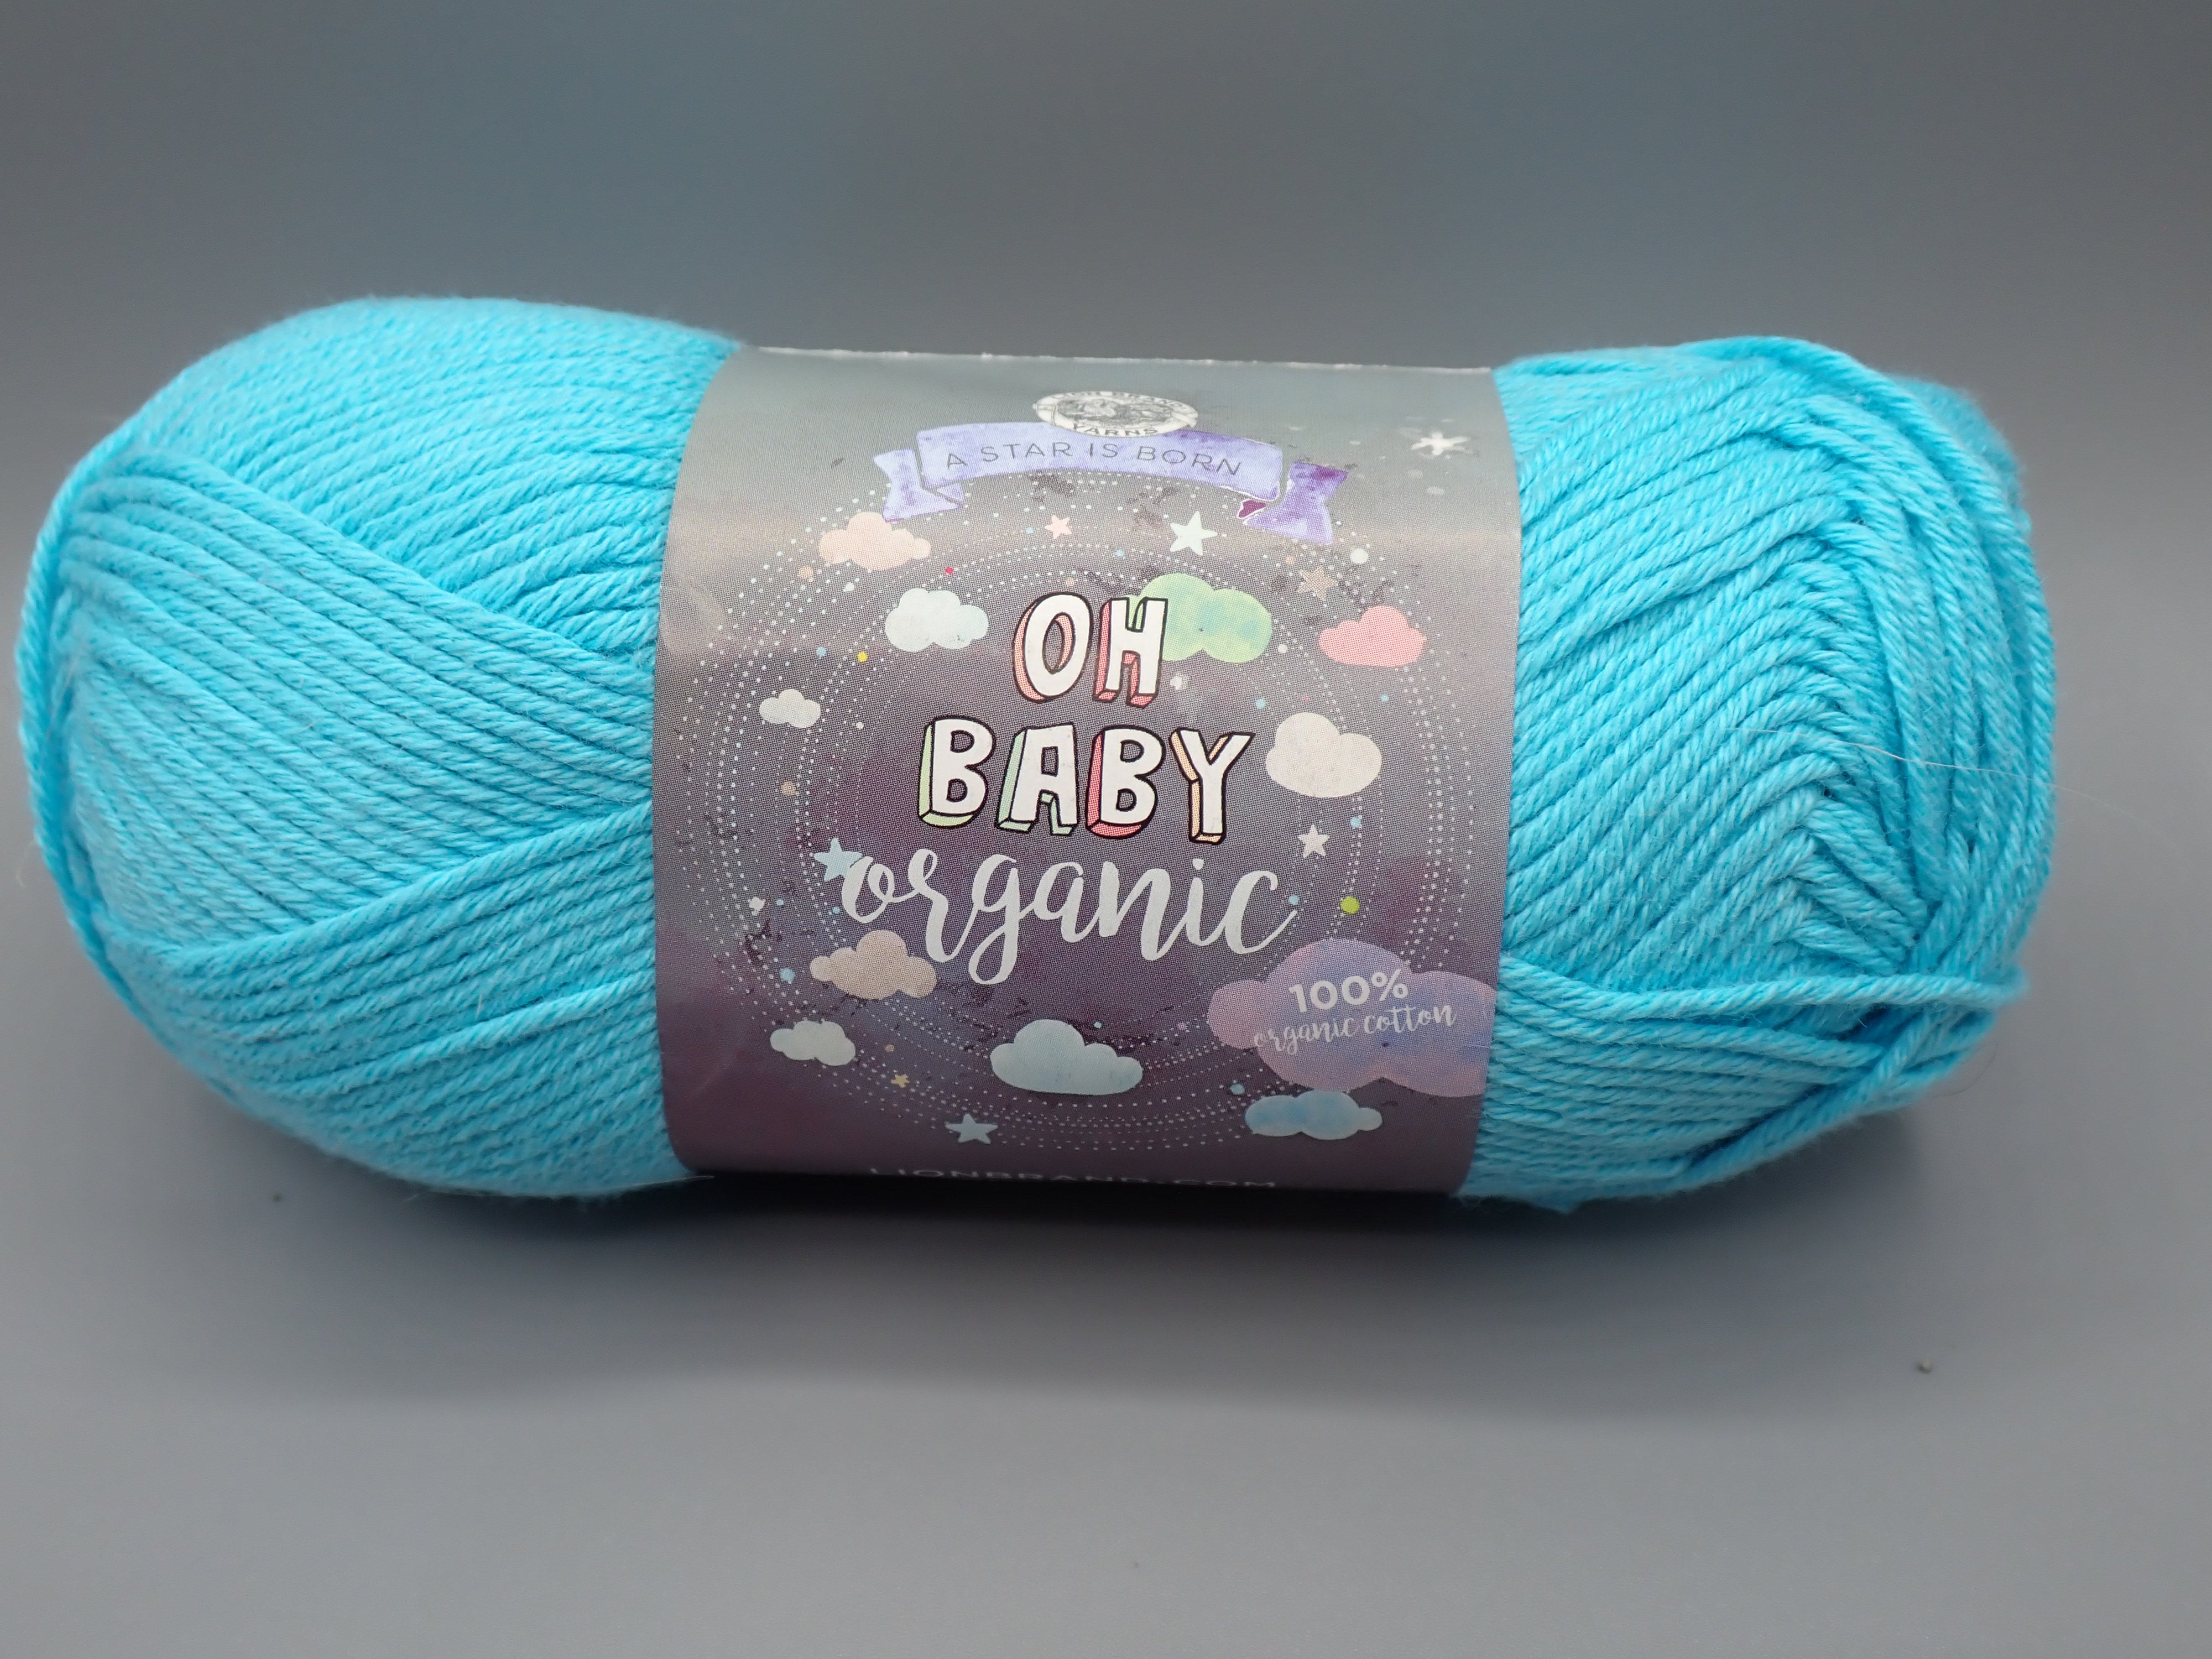 Lion Brand Yarns Sport weight Oh Baby Organic Turquoise